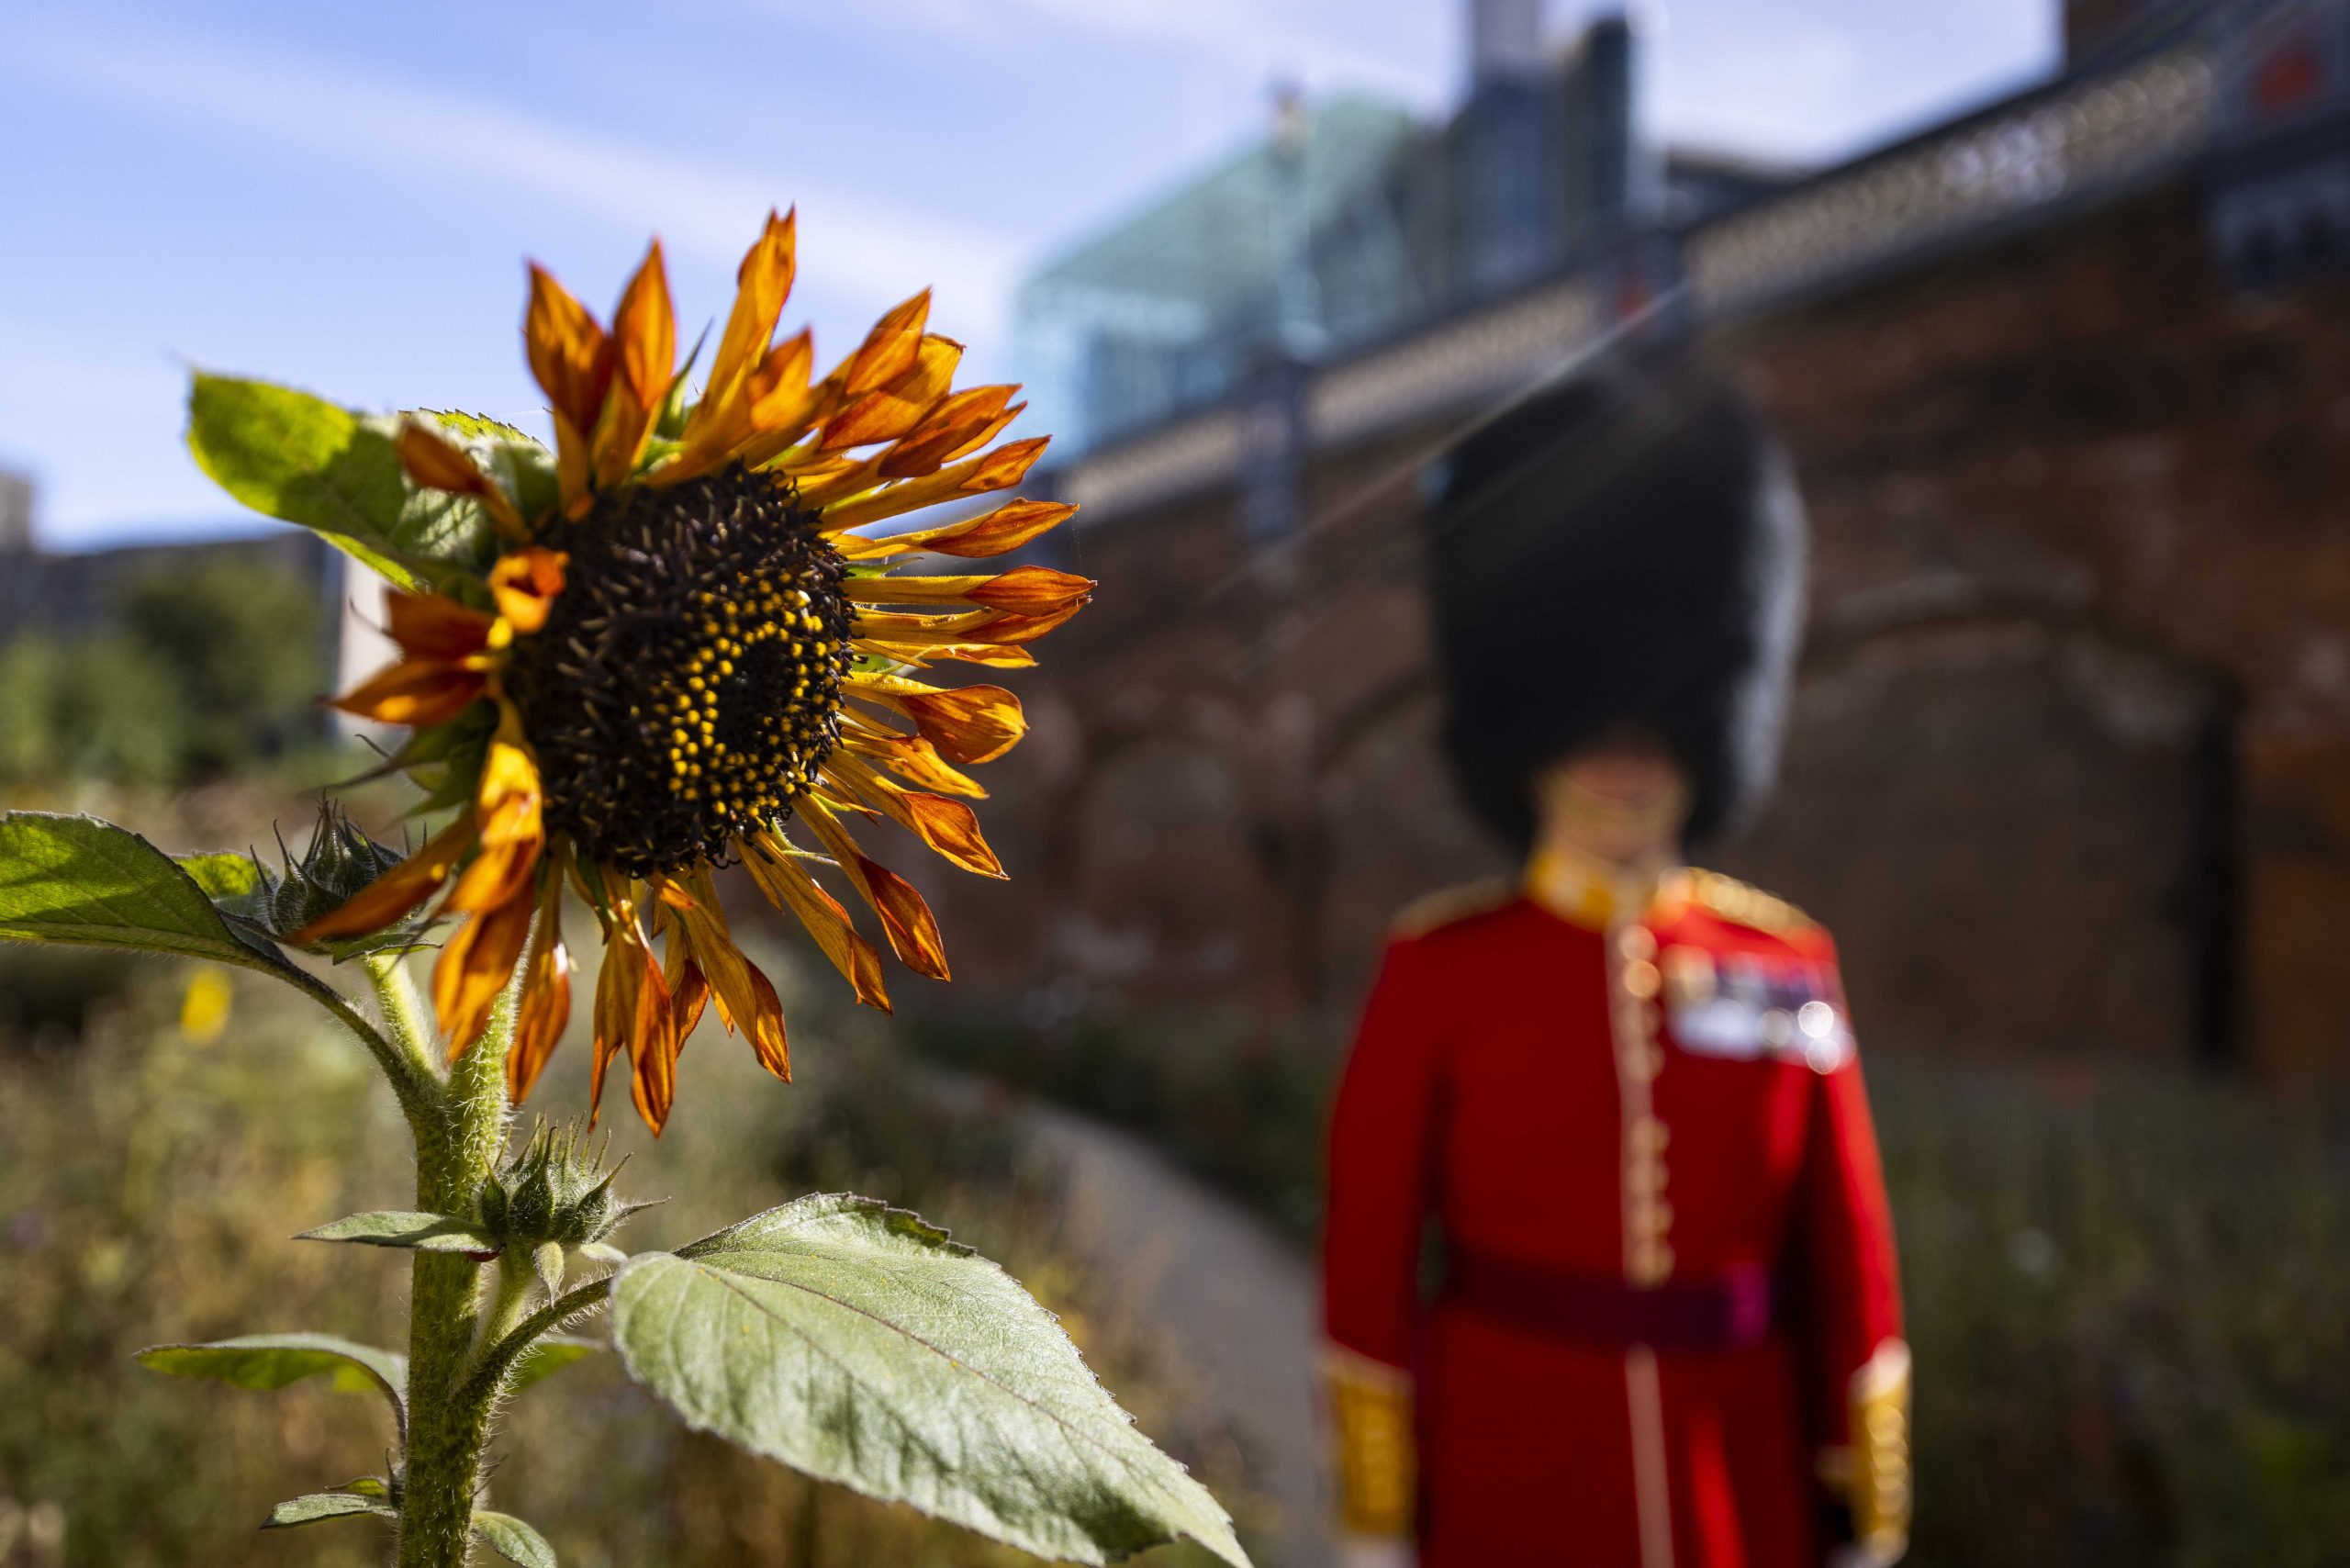 Blooming Lovely! The Tower Guards Protecting London’s Precious Wildlife